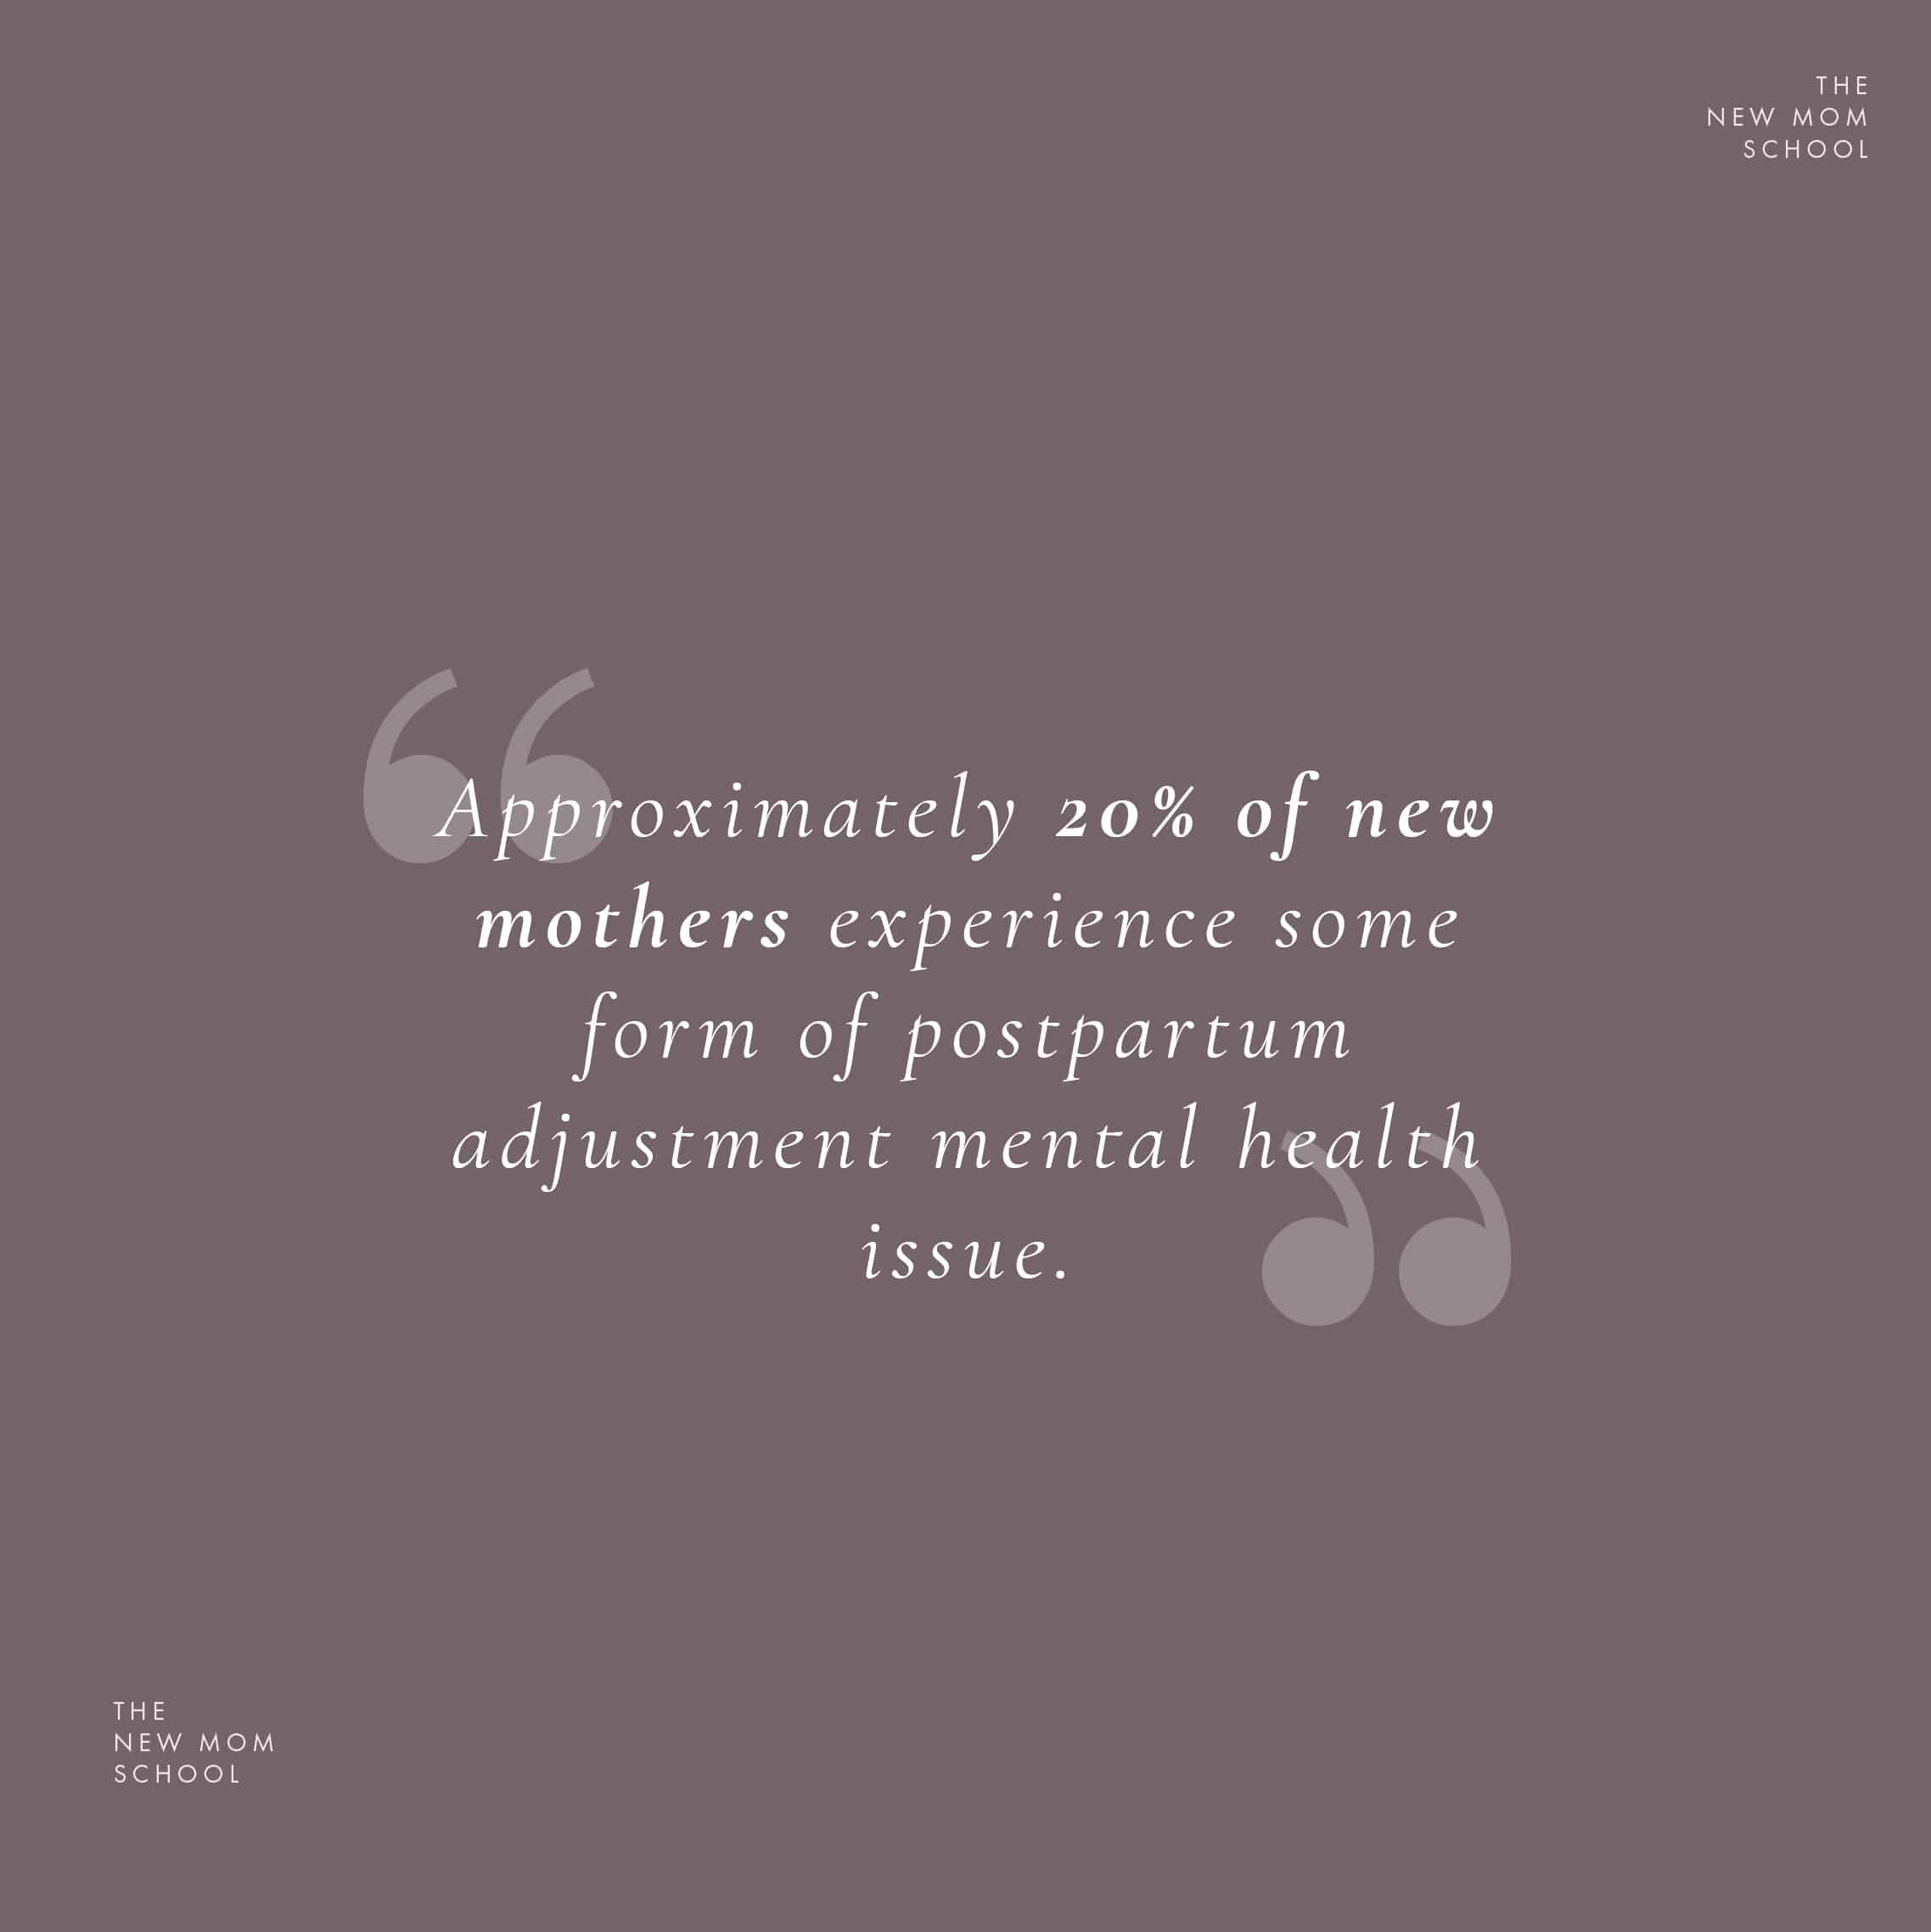 Approximately 20% of new mothers experience some form of postpartum adjustment mental health issue. 